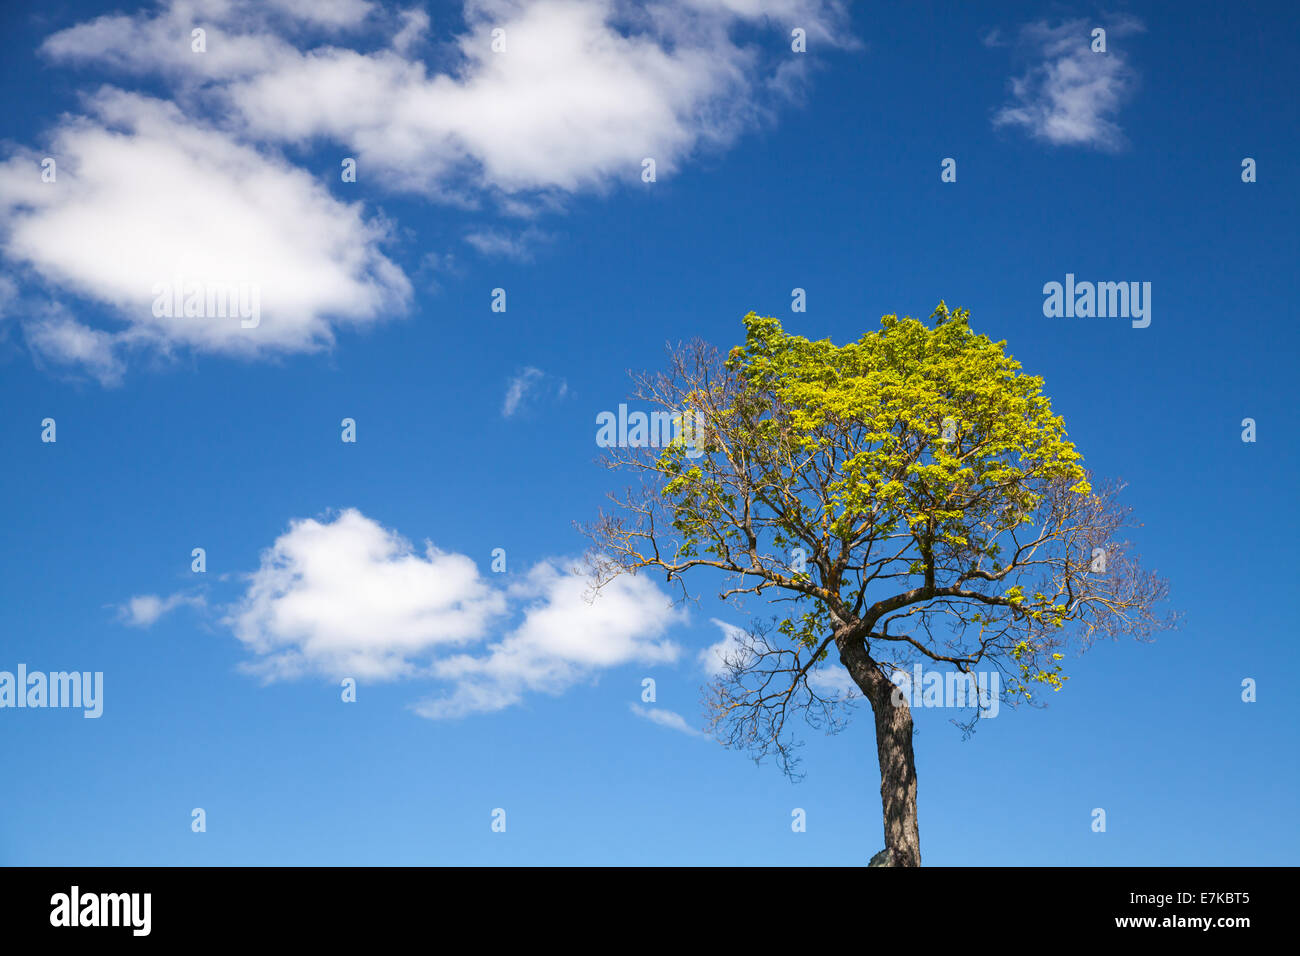 Small bright green tree with blue sky and clouds on background Stock Photo